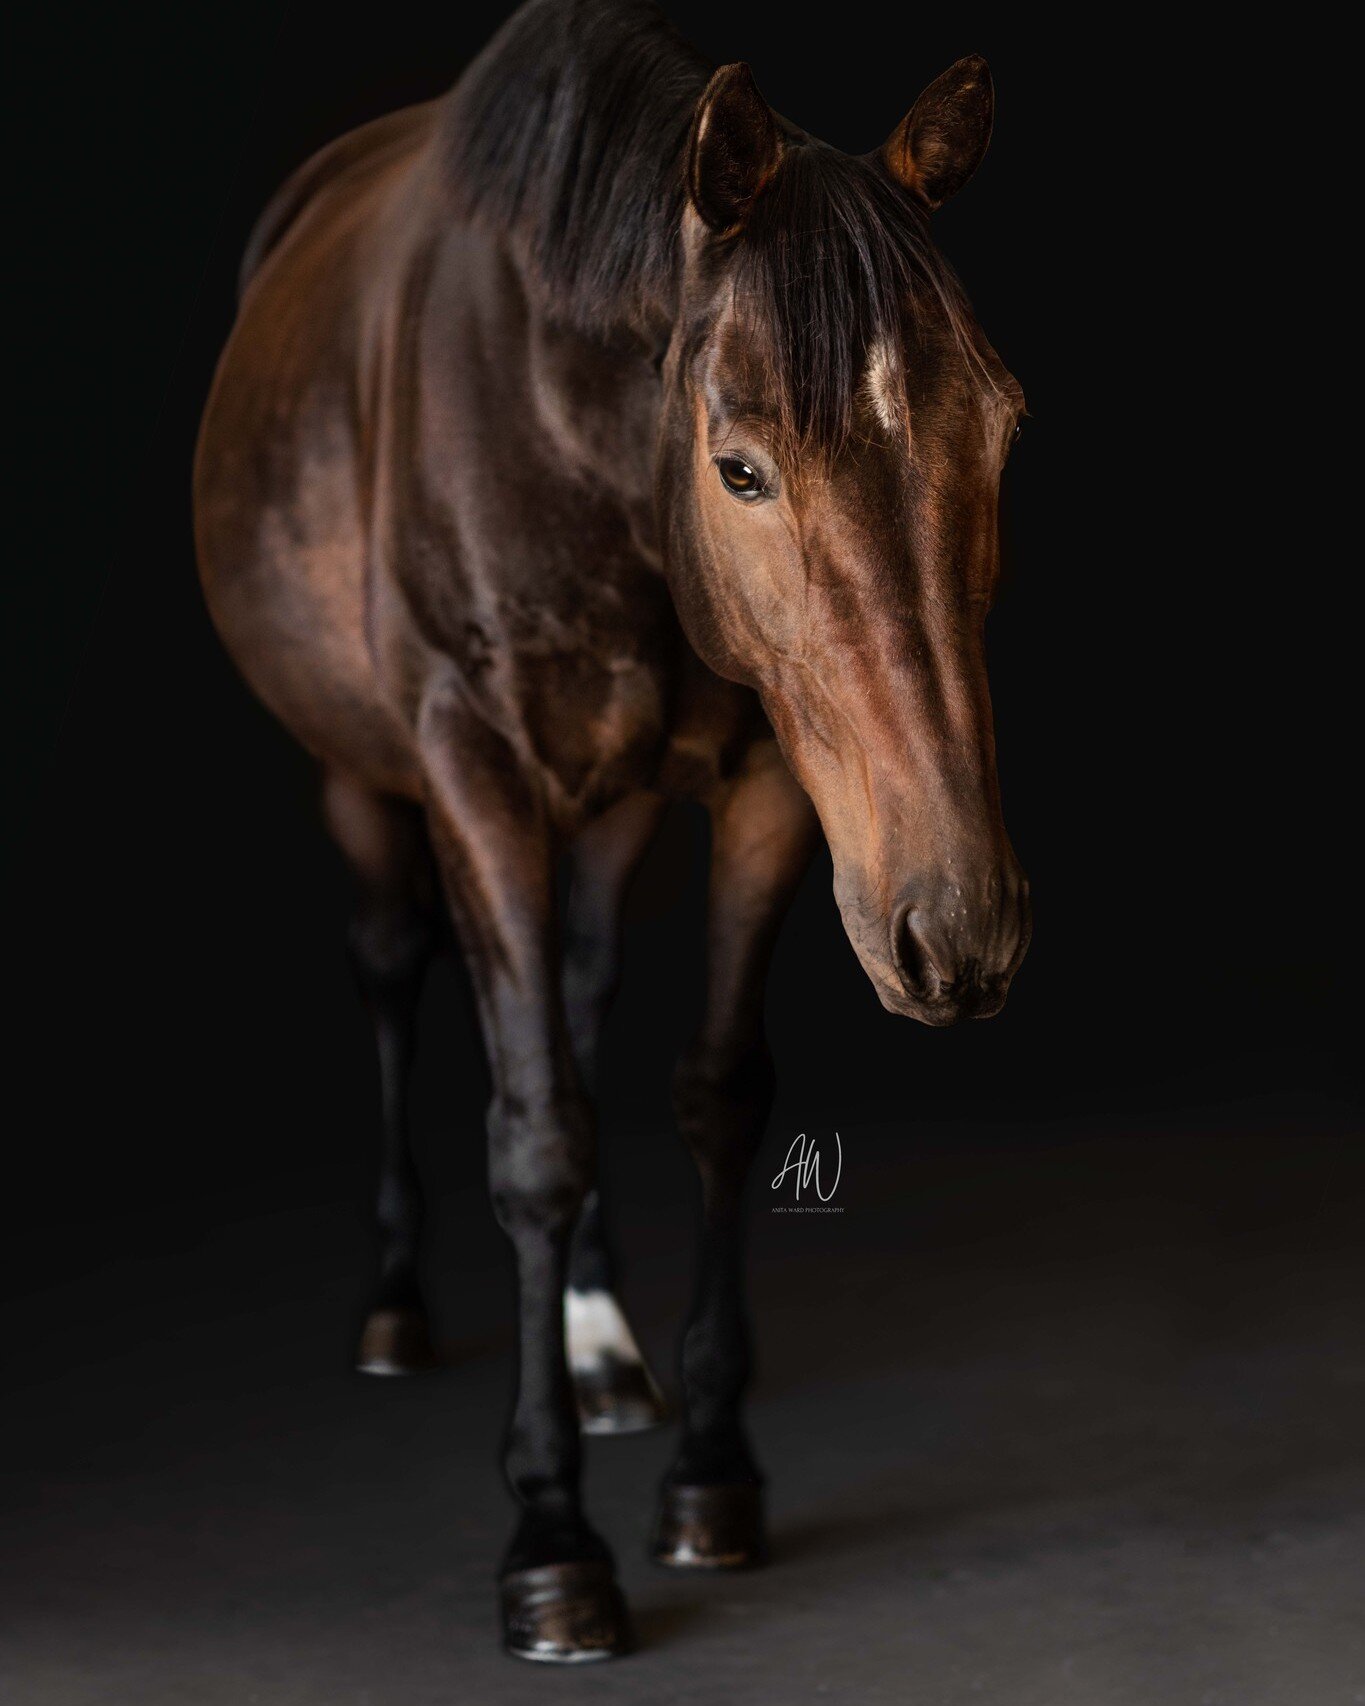 A cheeky sneak peak for Sara, of her Standardbred gelding Fl&oacute;ki 🖤
⁣
Monday was such a fun day! Aaron and I had the pleasure of meeting Sara and her Standardbred gelding Fl&oacute;ki for a black background session. As soon as I met Fl&oacute;k